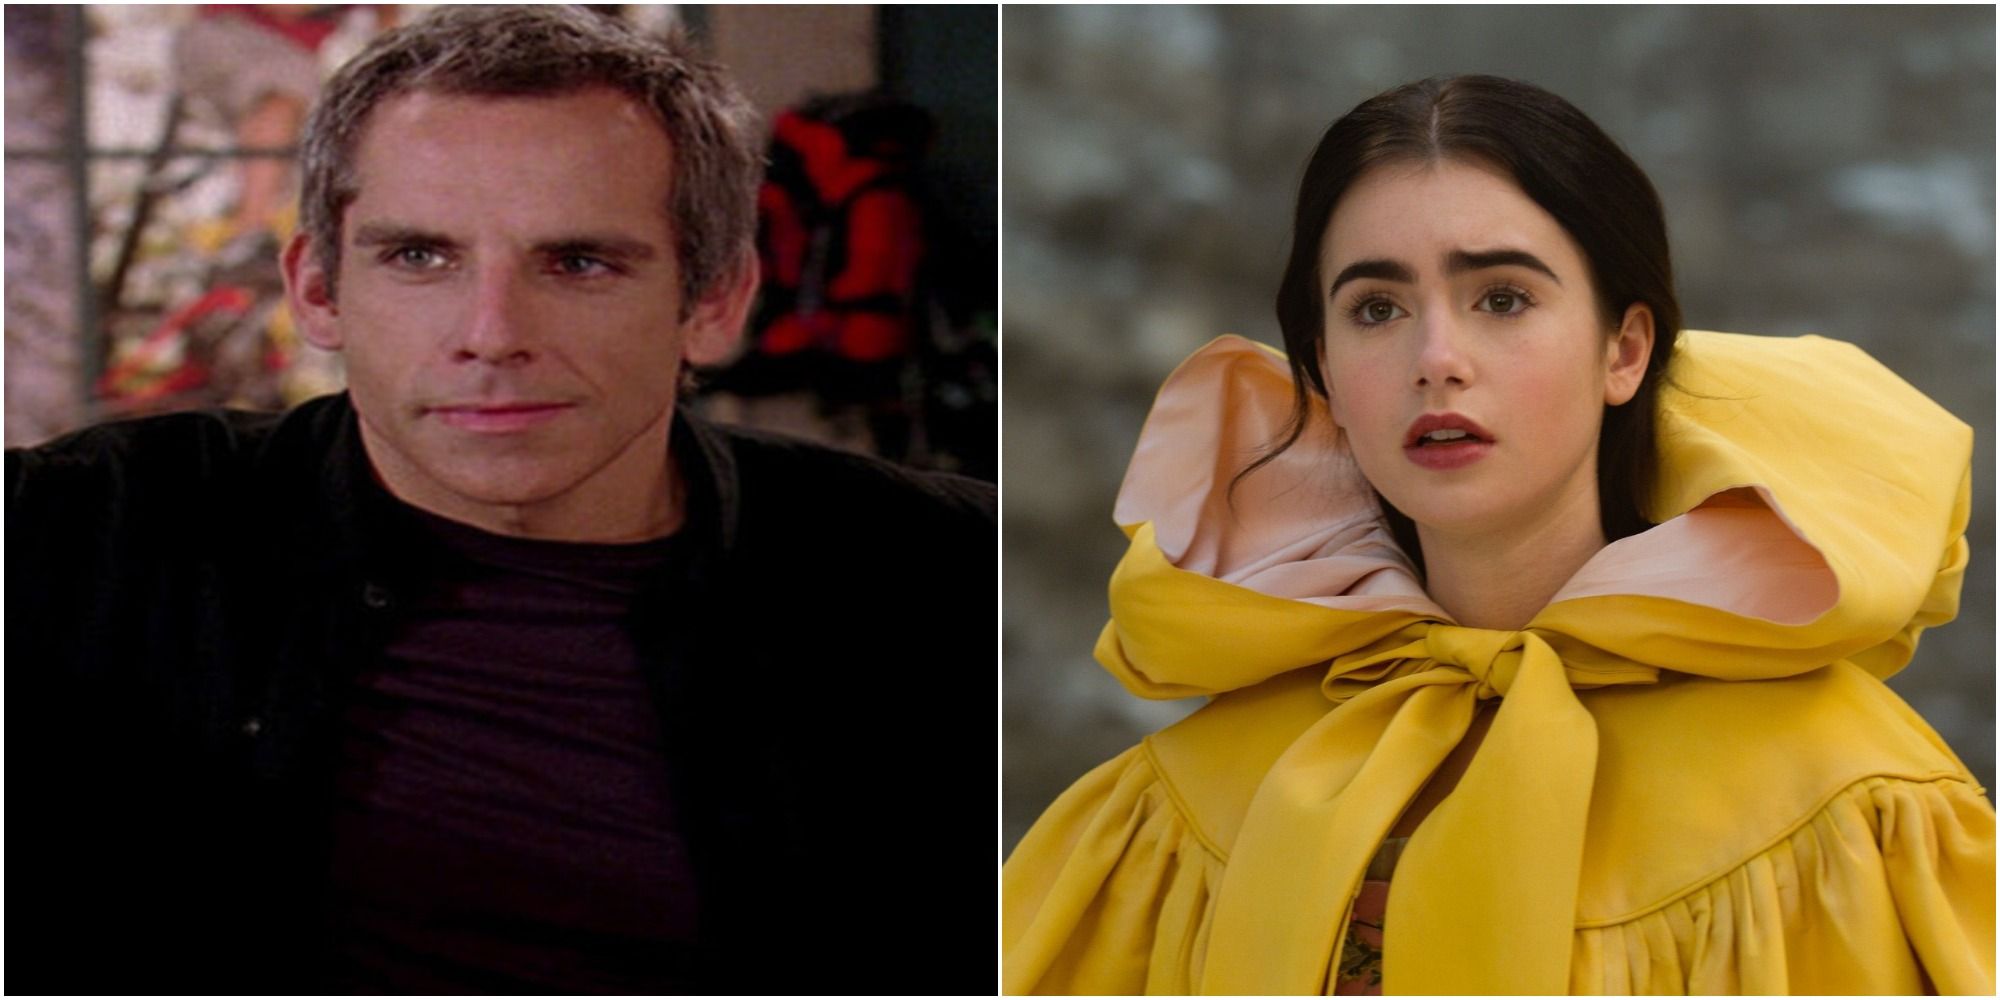 Ben Stiller and Lily Collins, two actors with famous parents